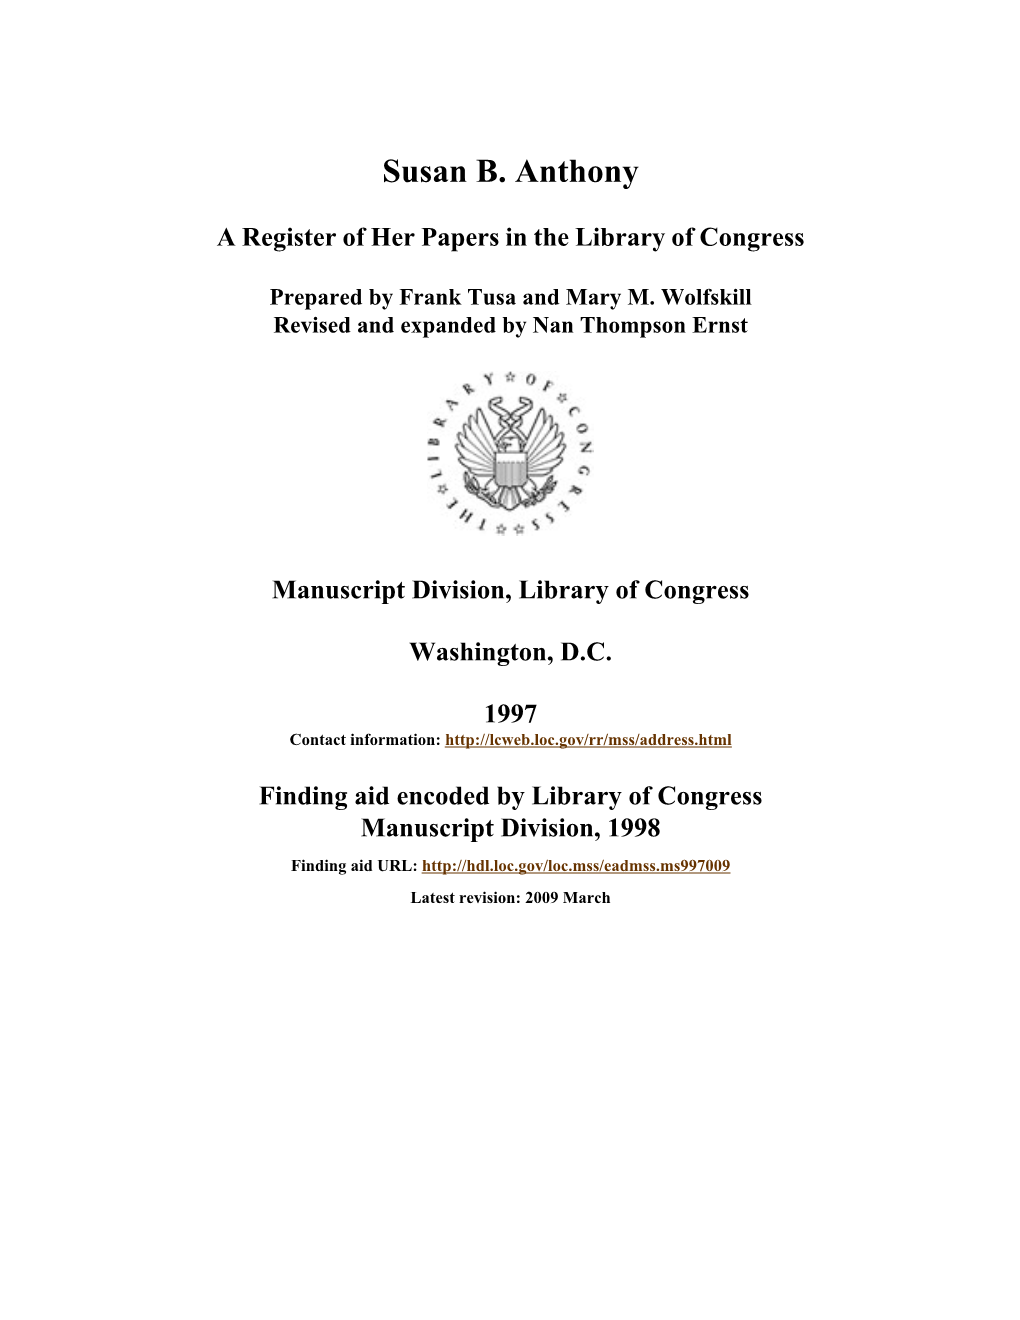 Papers of Susan B. Anthony [Finding Aid]. Library